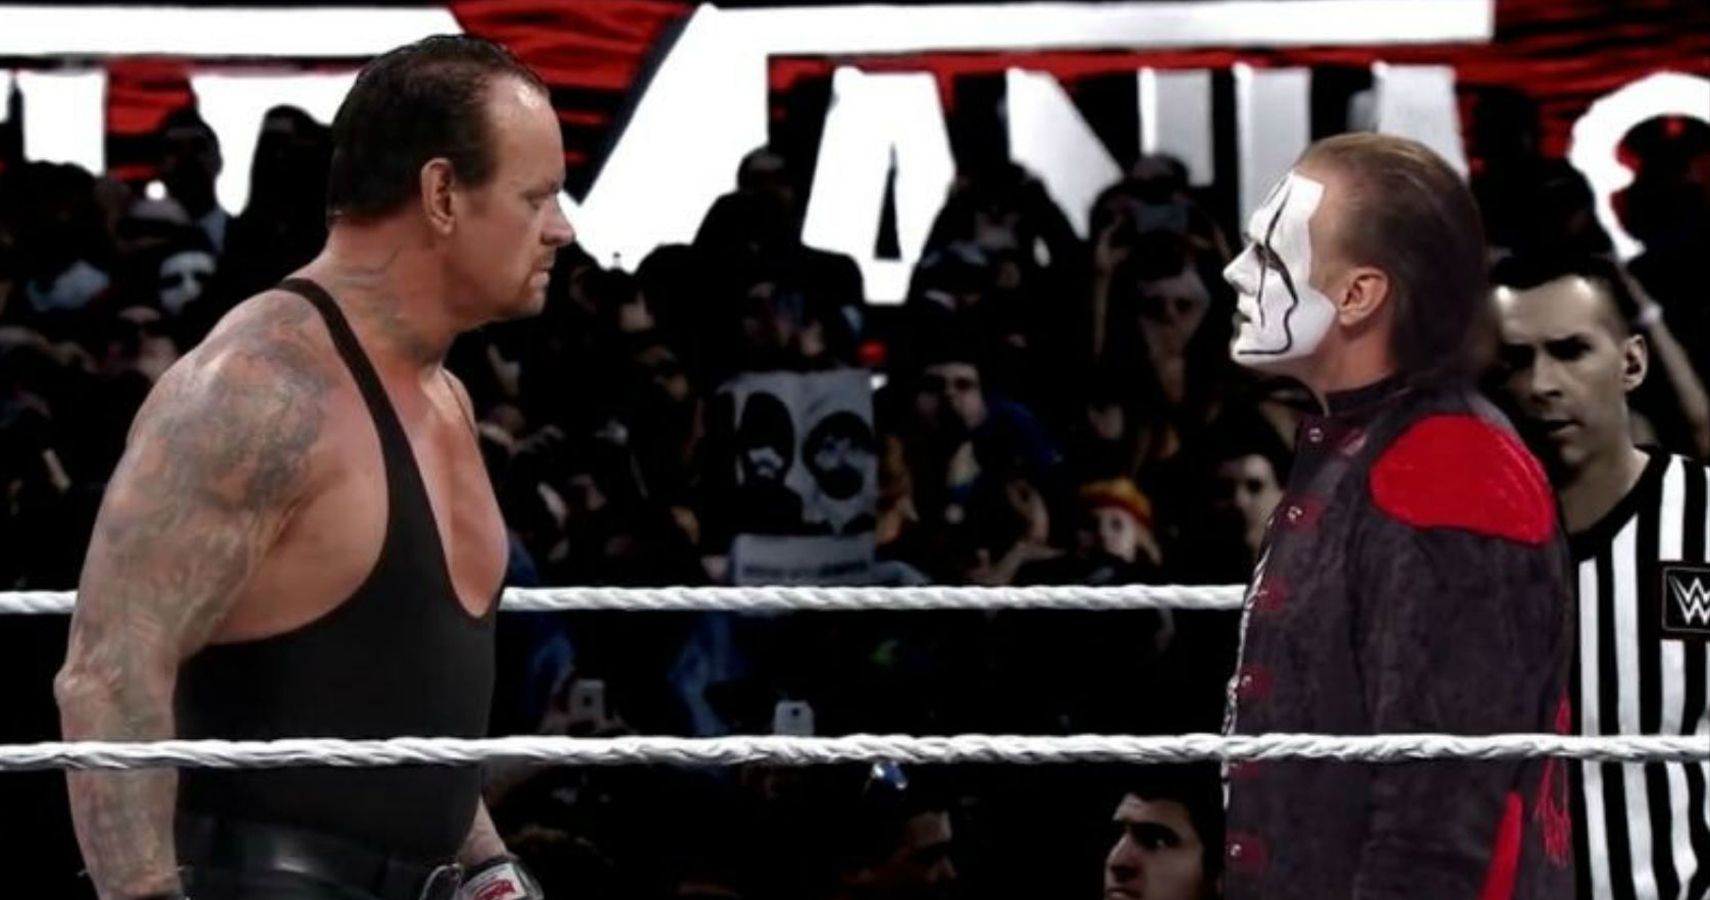 Sting and the Undertaker face-off